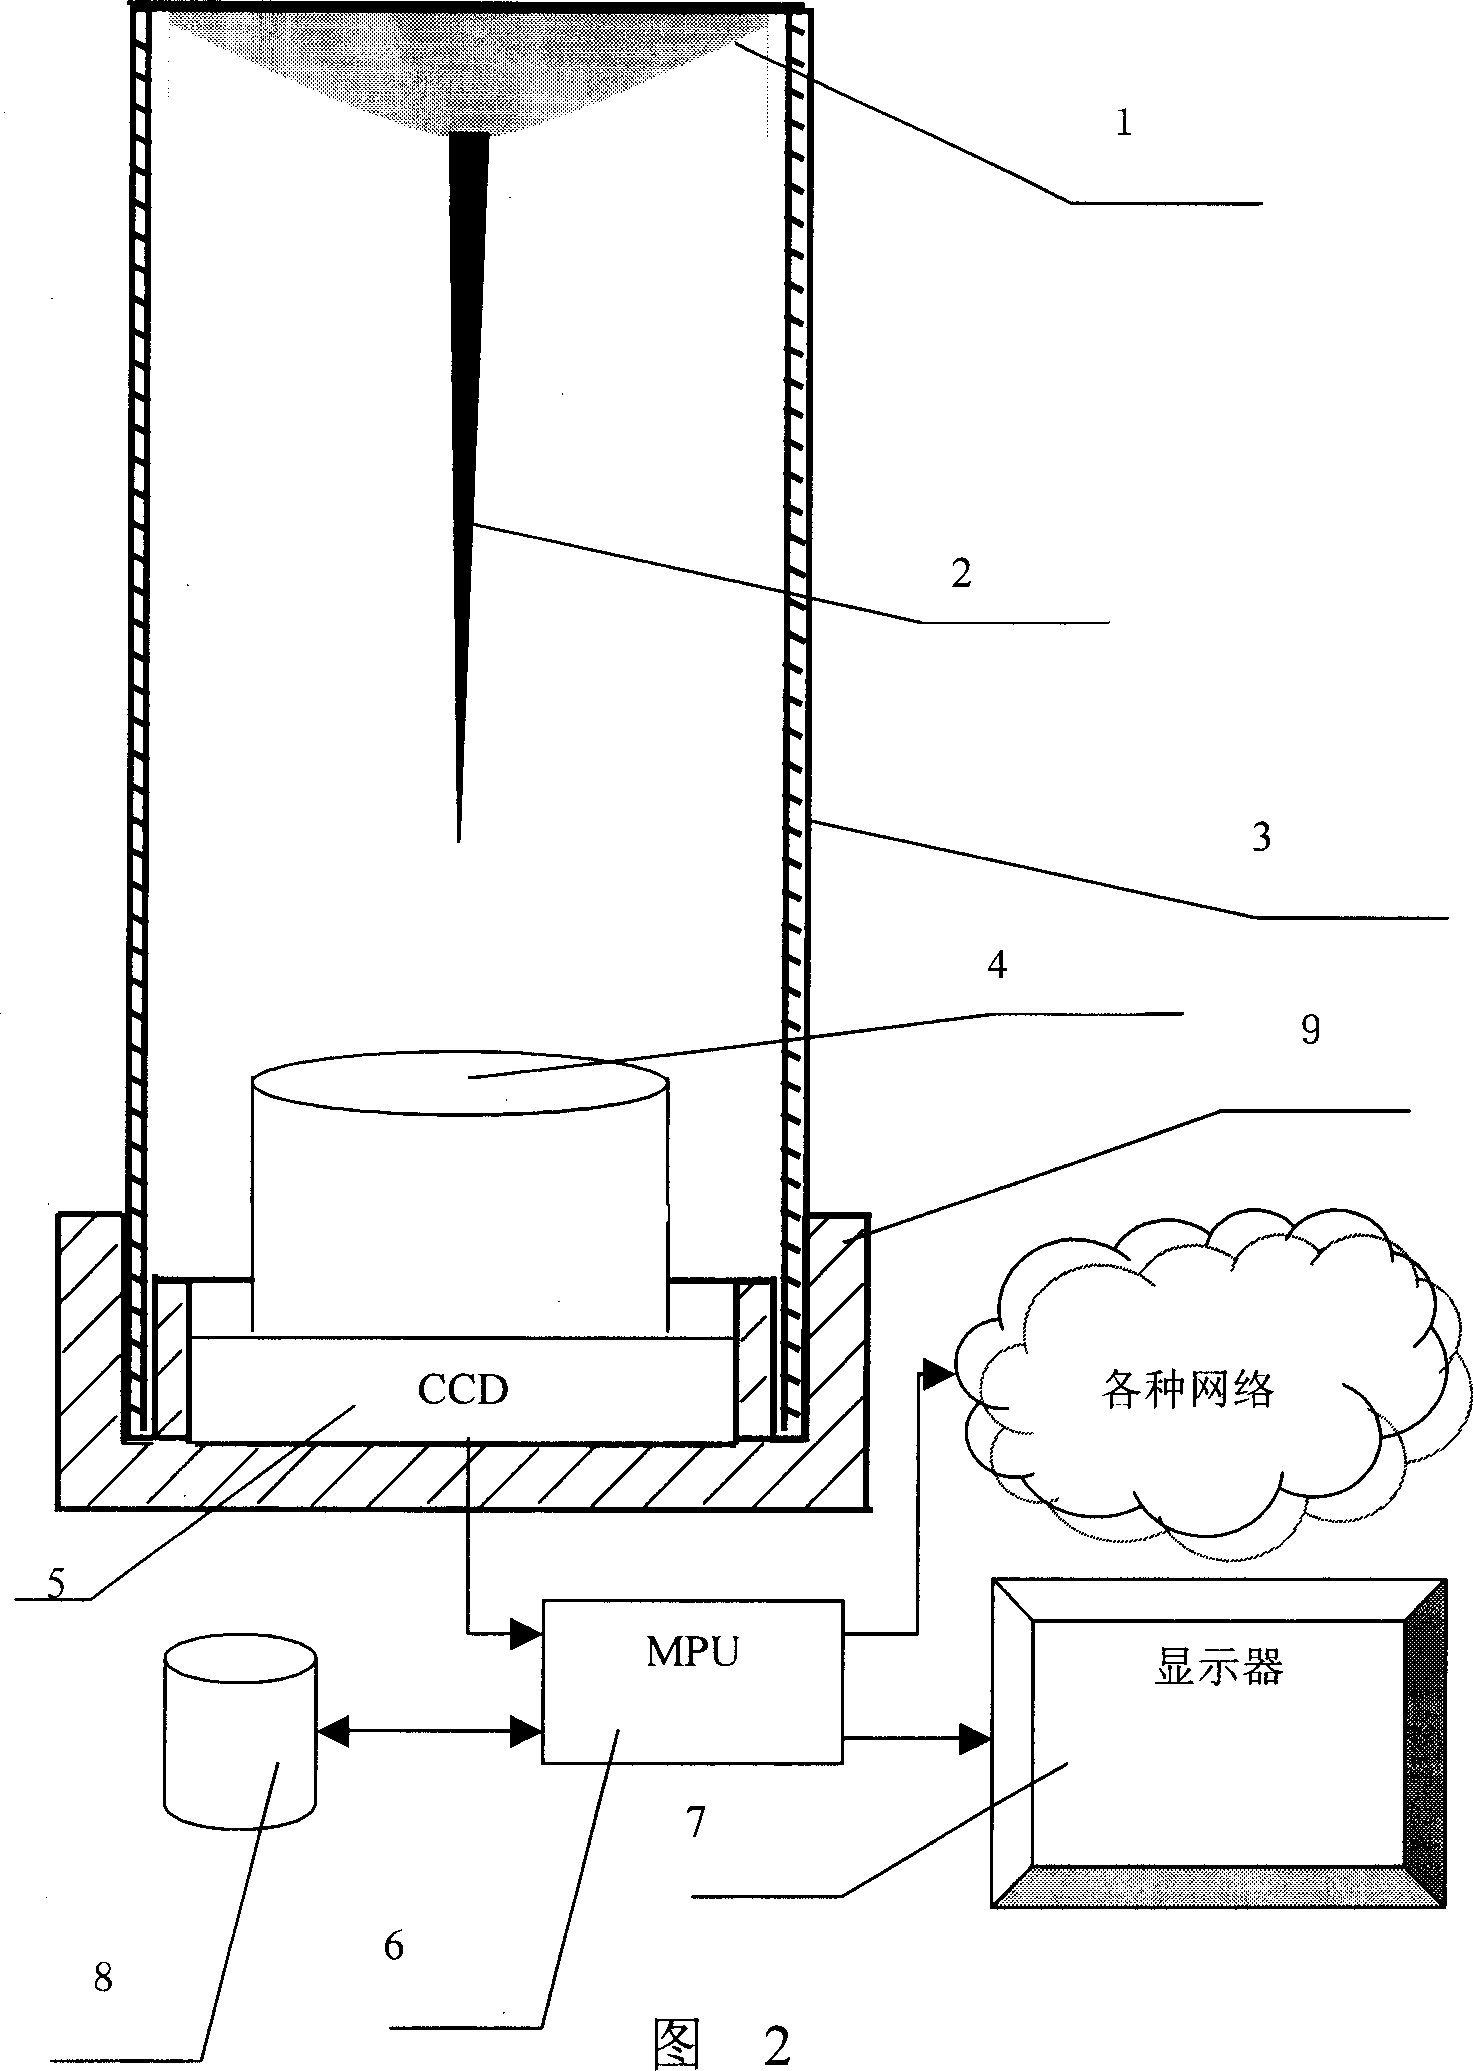 Intelligent tunnel safety monitoring apparatus based on omnibearing computer vision